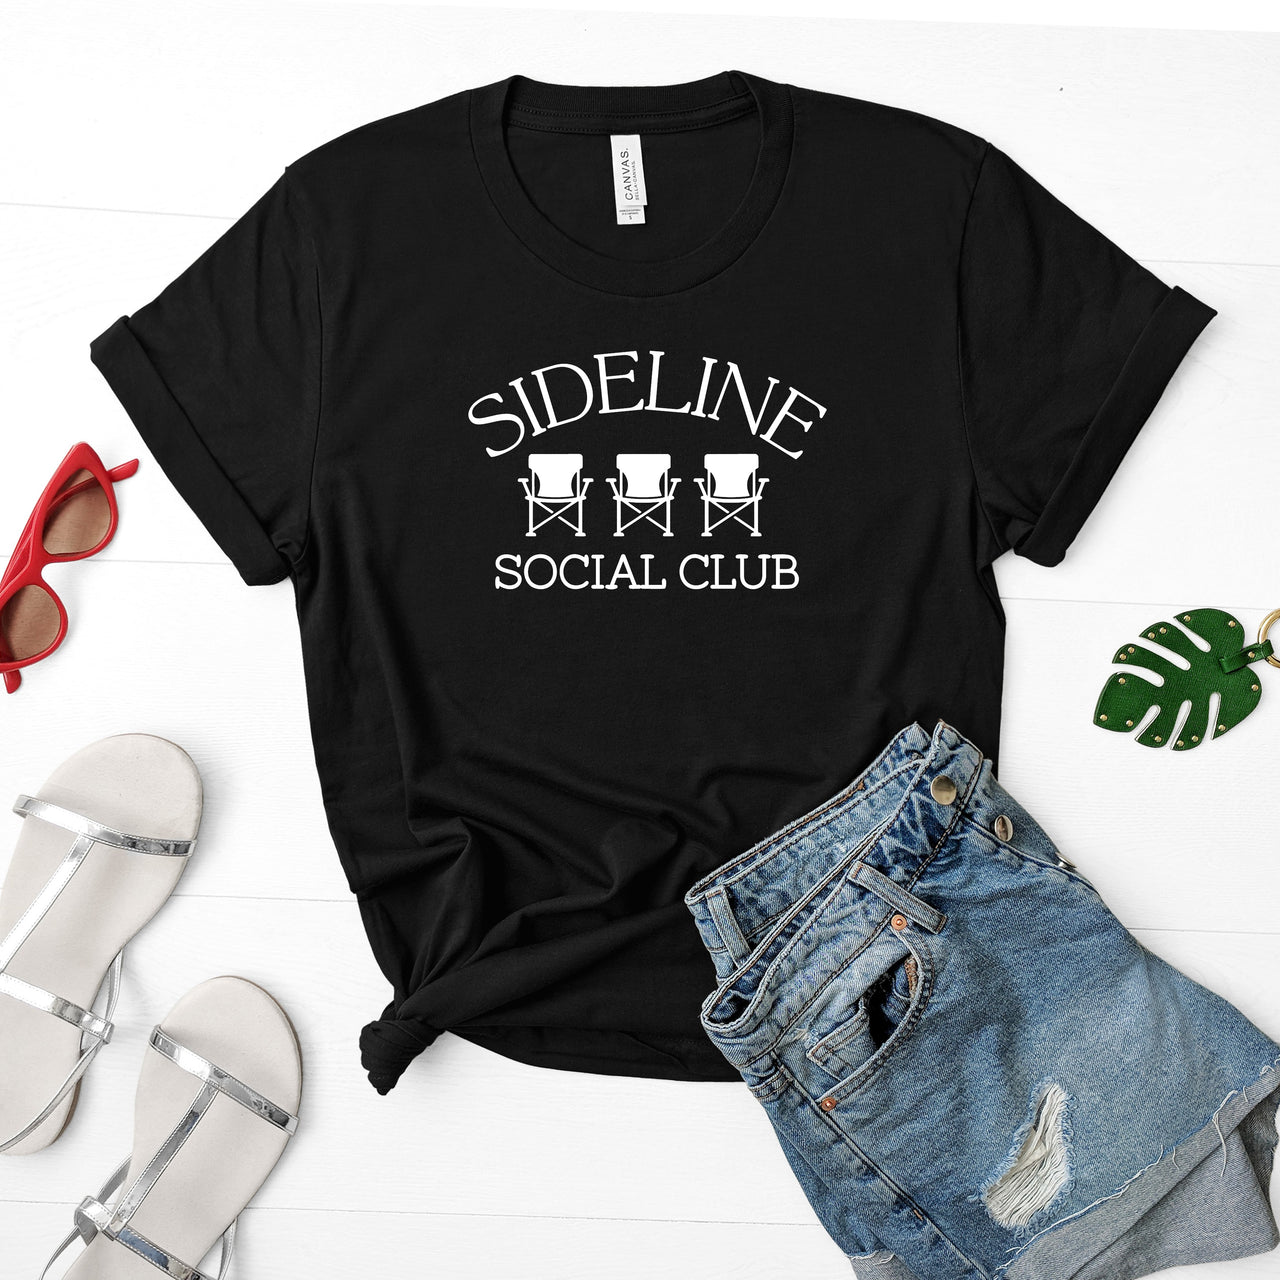 Adult - Unisex Cotton/Poly Tee (Sideline Social Club)